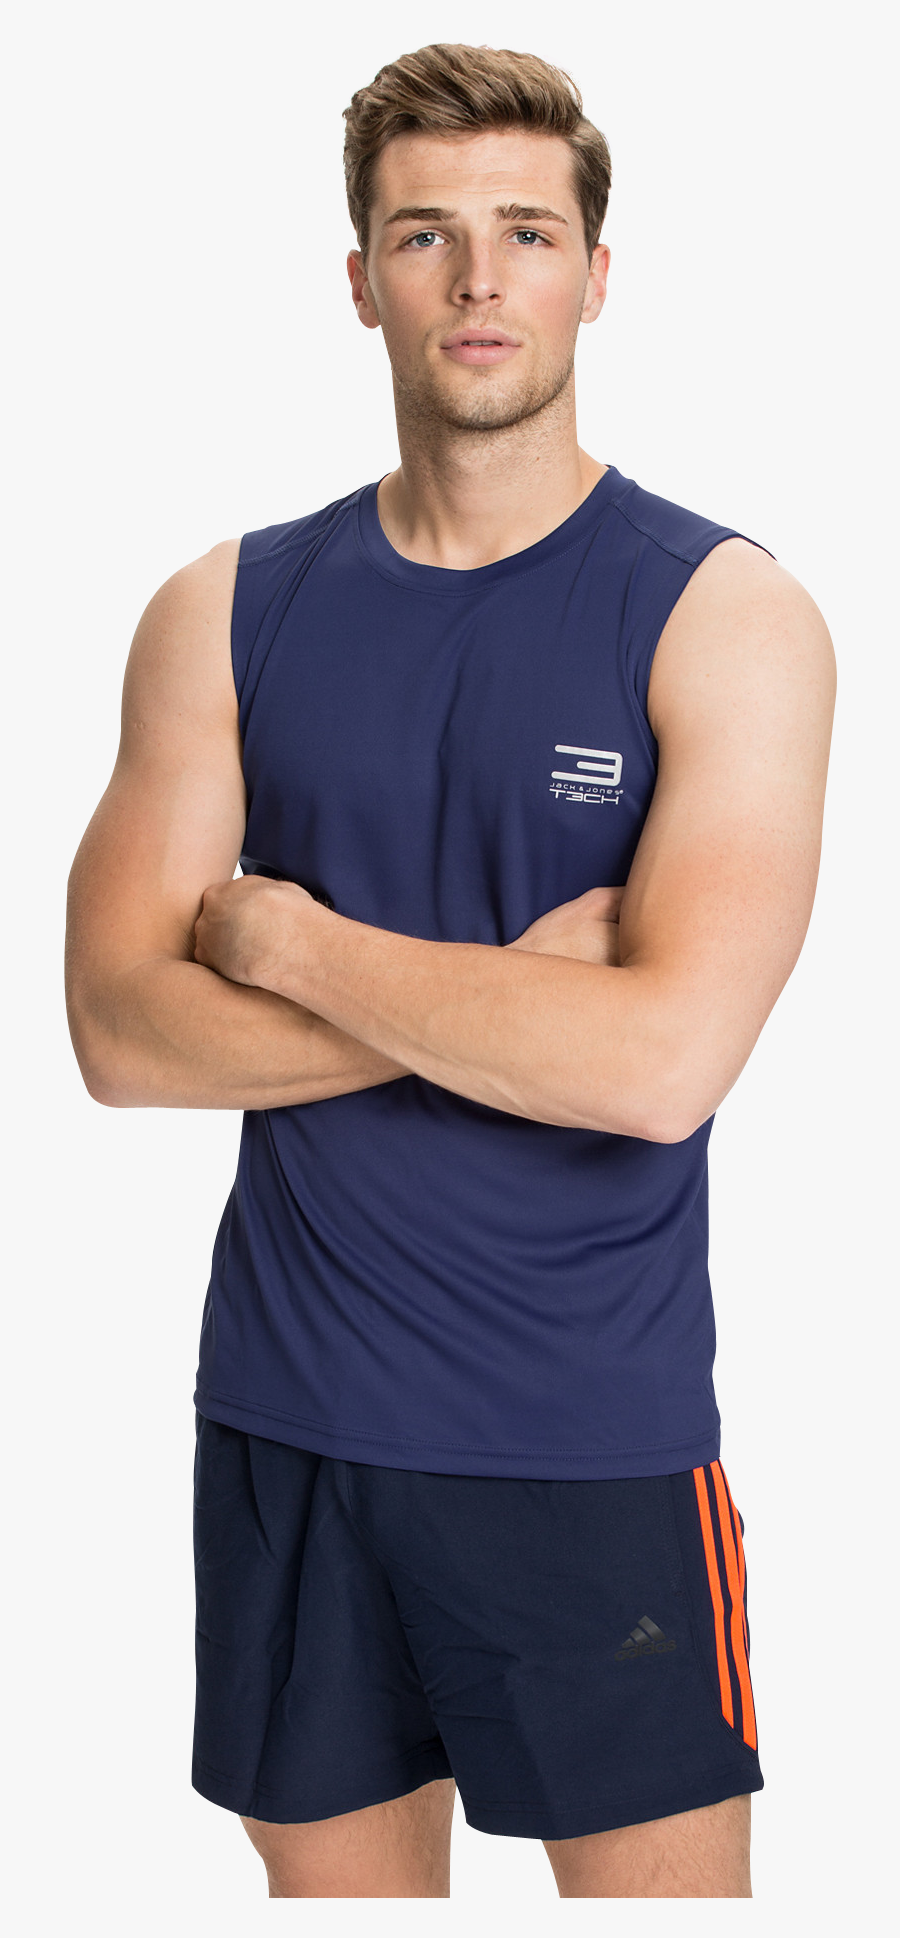 Fitness Png Picture - Boy Png, Transparent Clipart